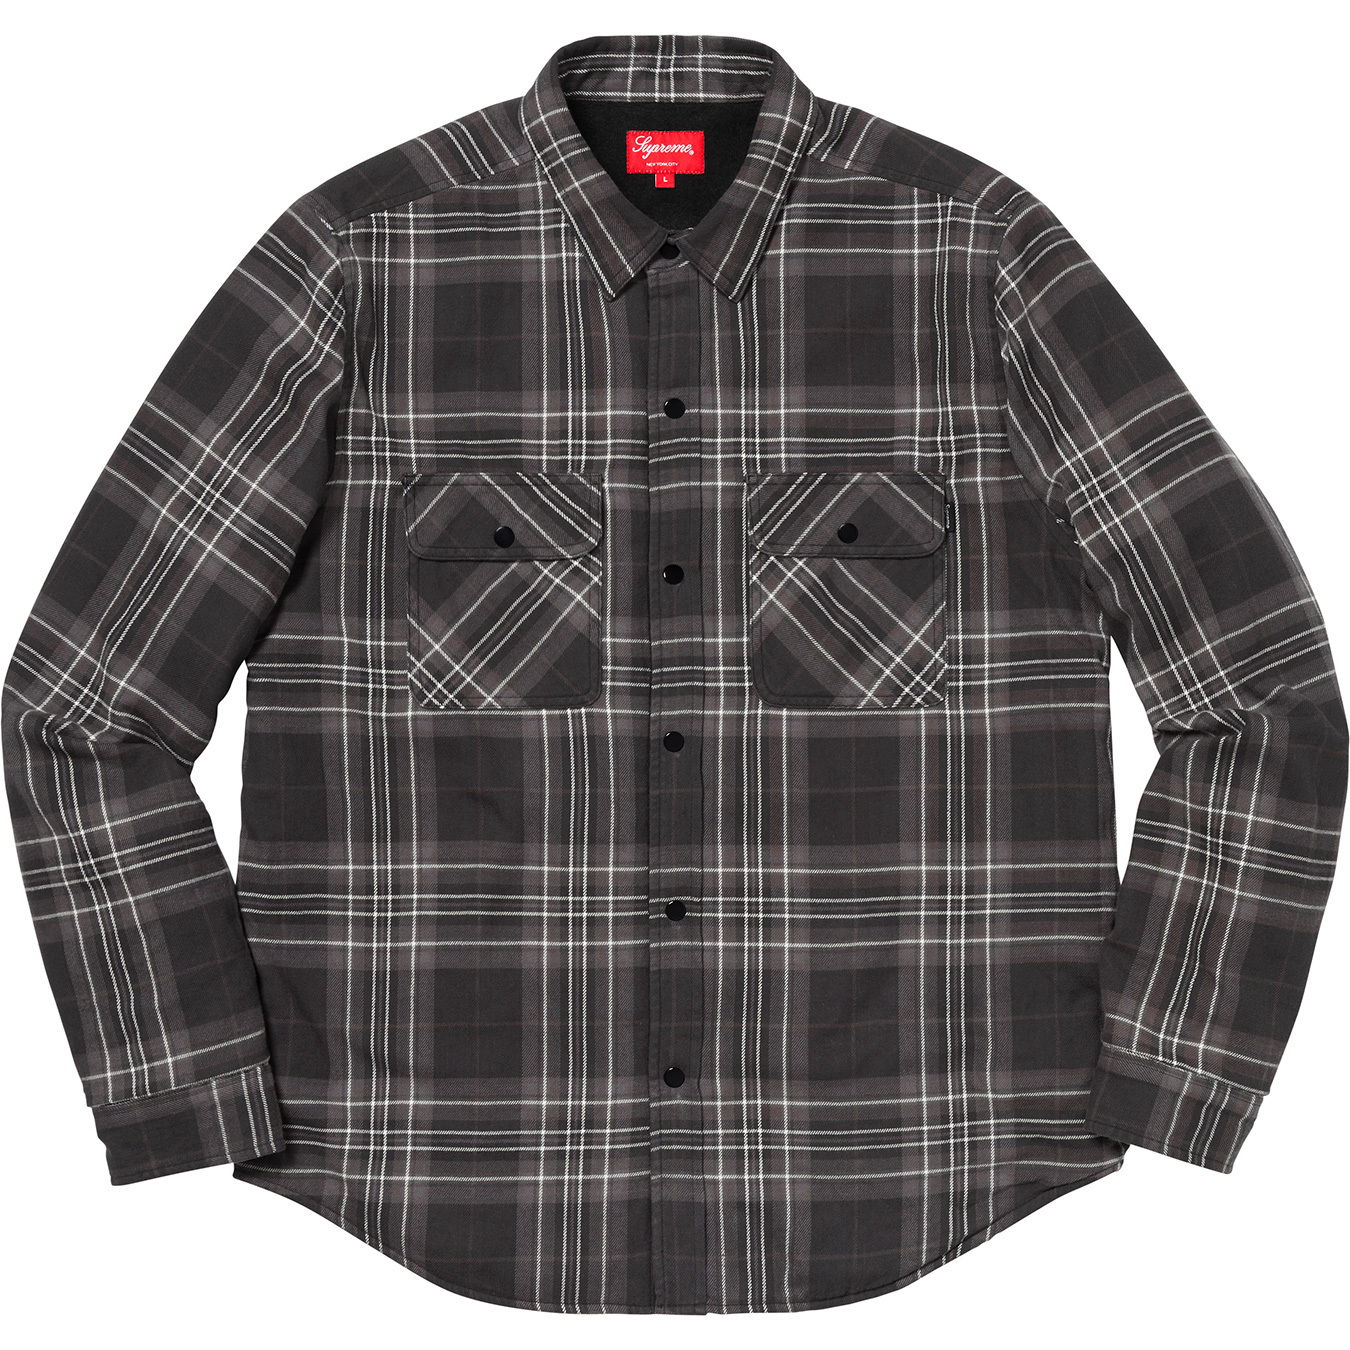 Pile Lined Plaid Flannel Shirt - fall winter 2018 - Supreme